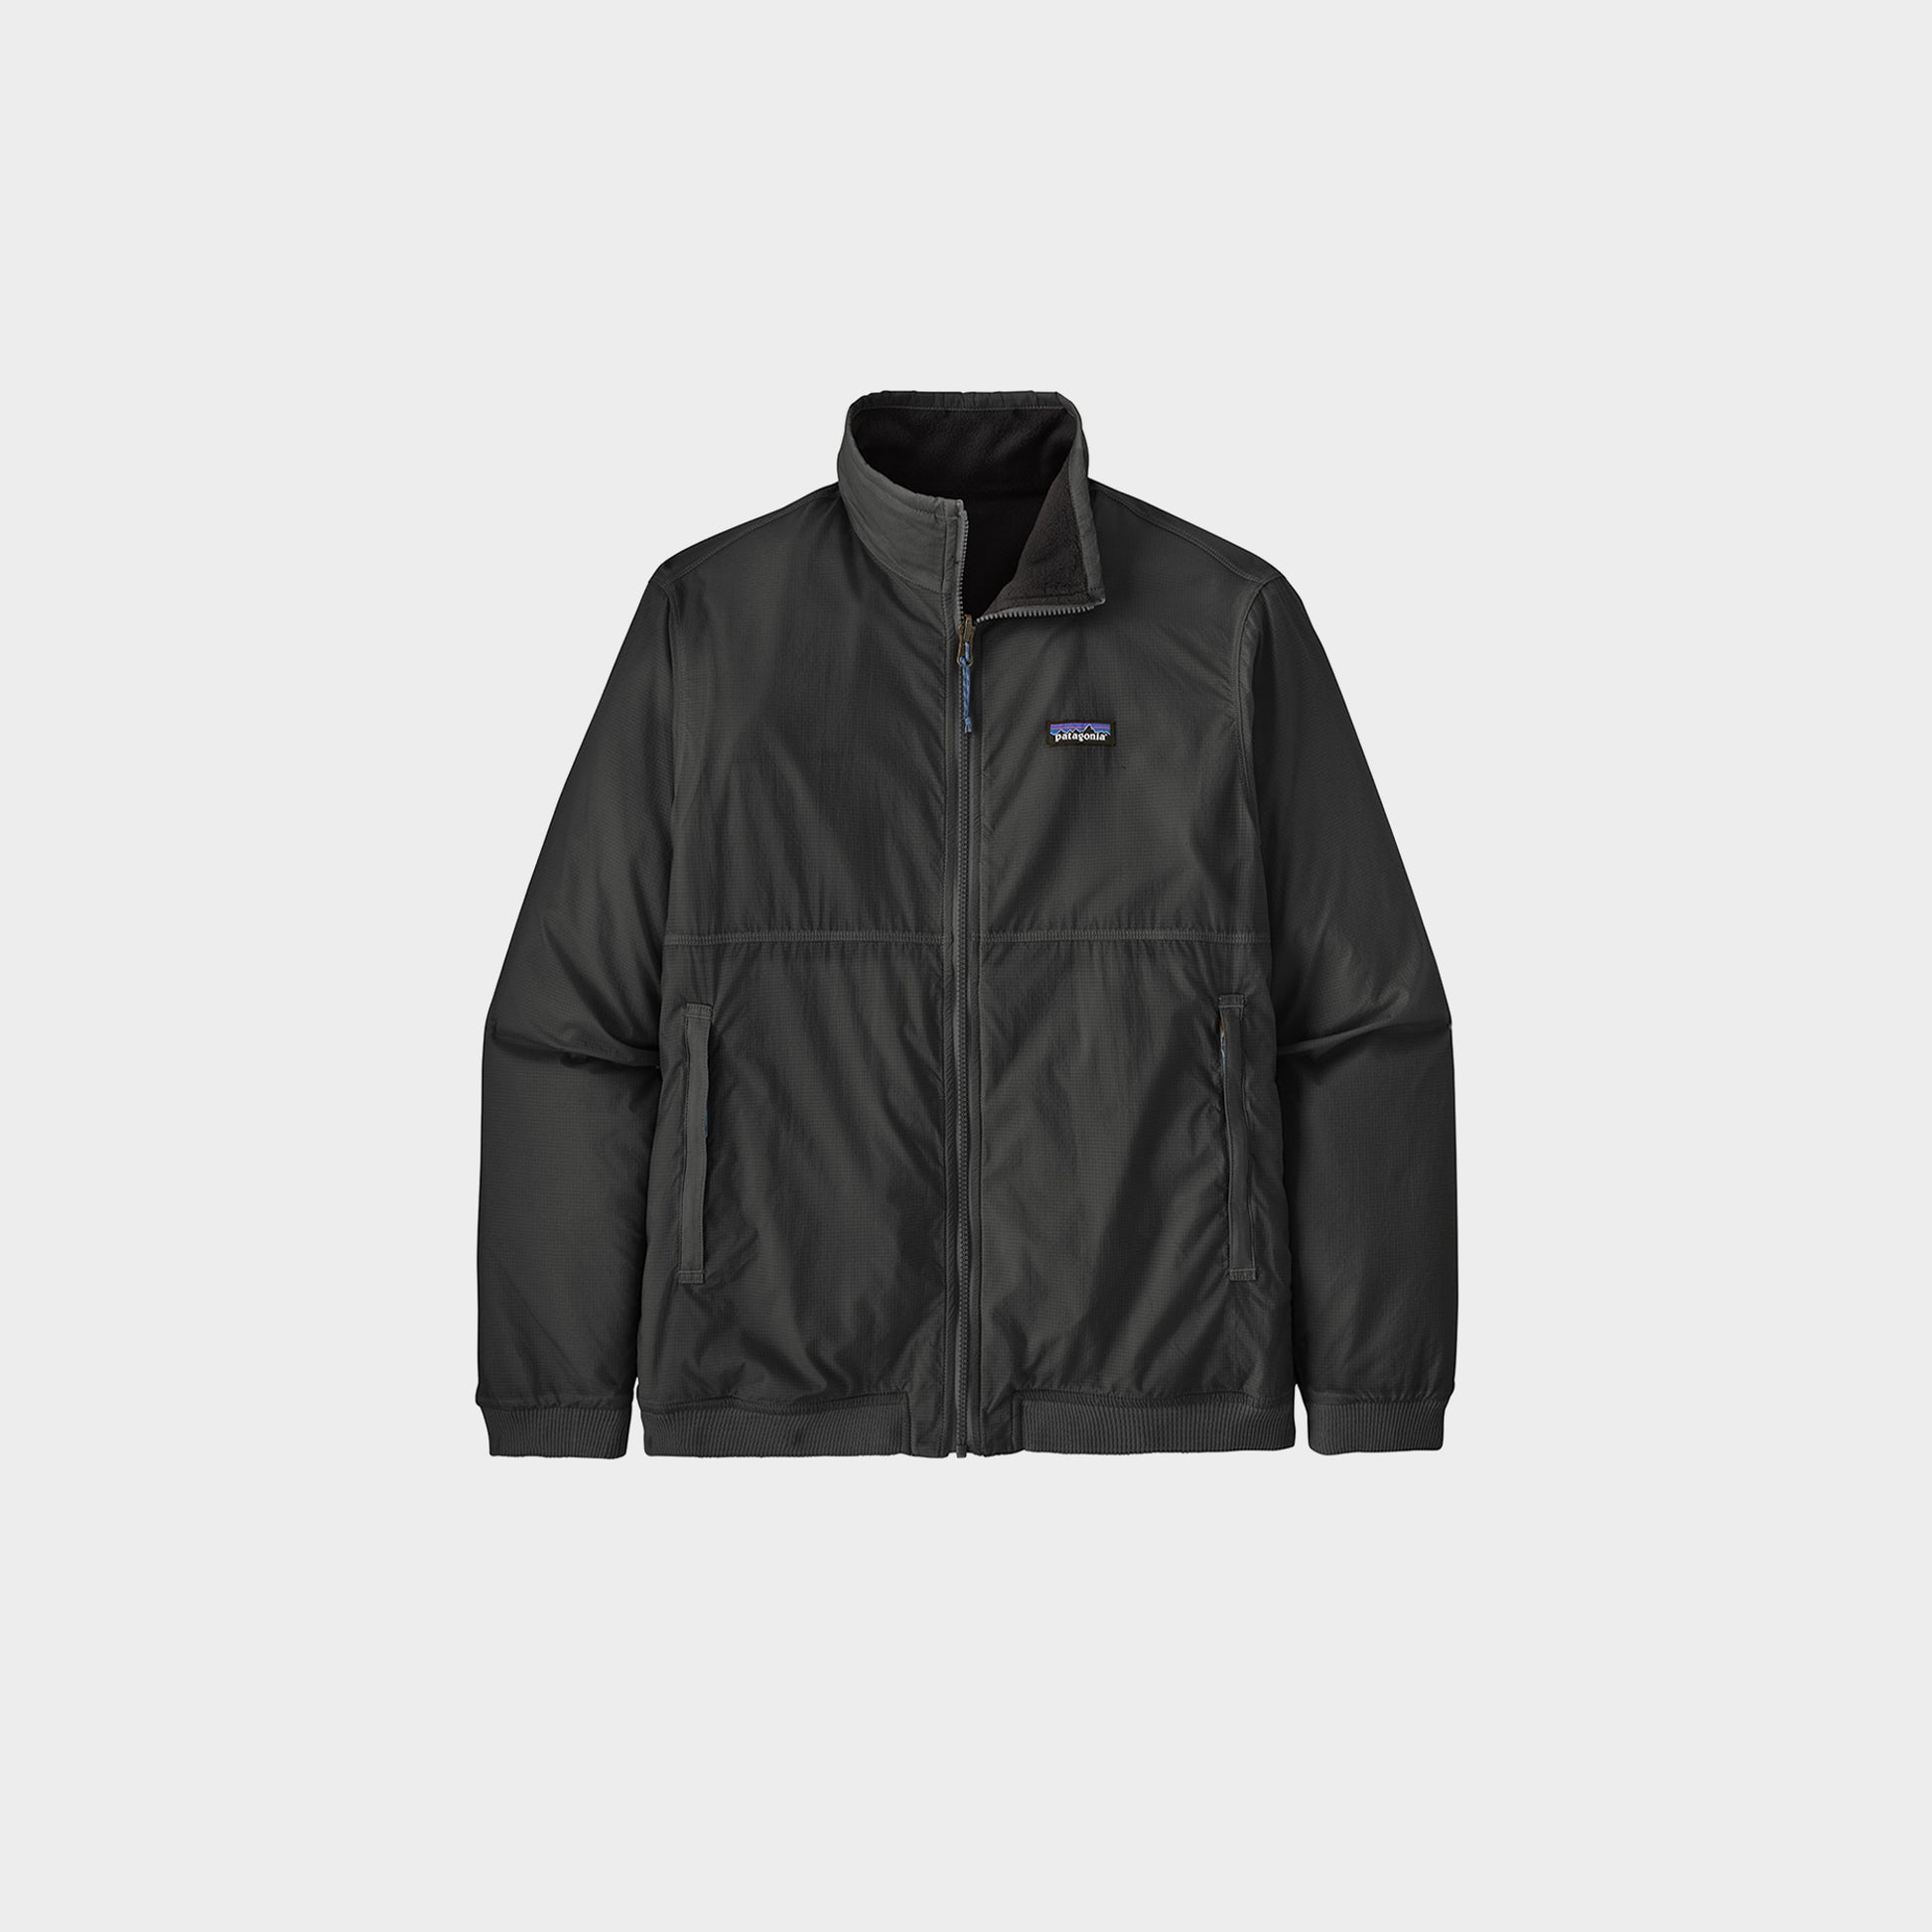 Patagonia Ms Reversible Shelled Microdini Jacket in Farbe black